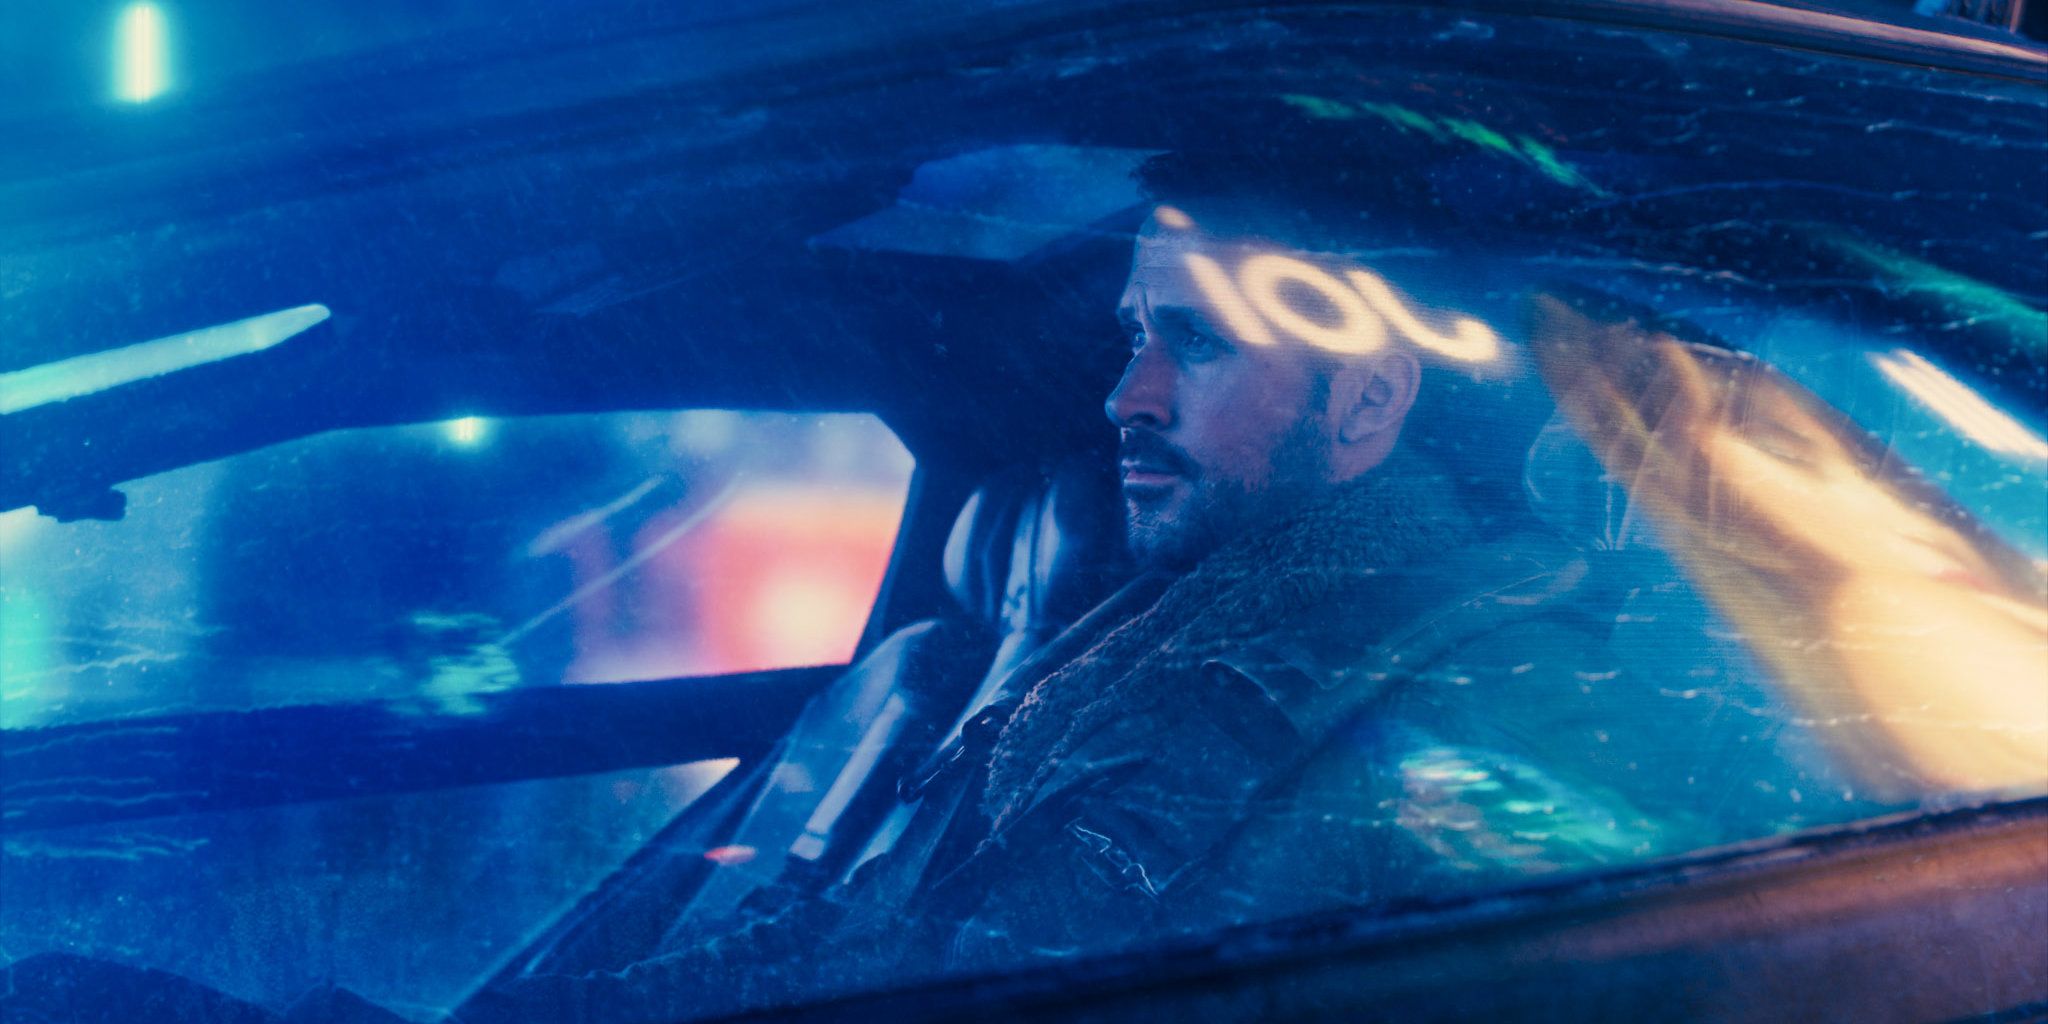 Blade Runner: Why Both The Original Movie & 2049 Bombed At The Box Office